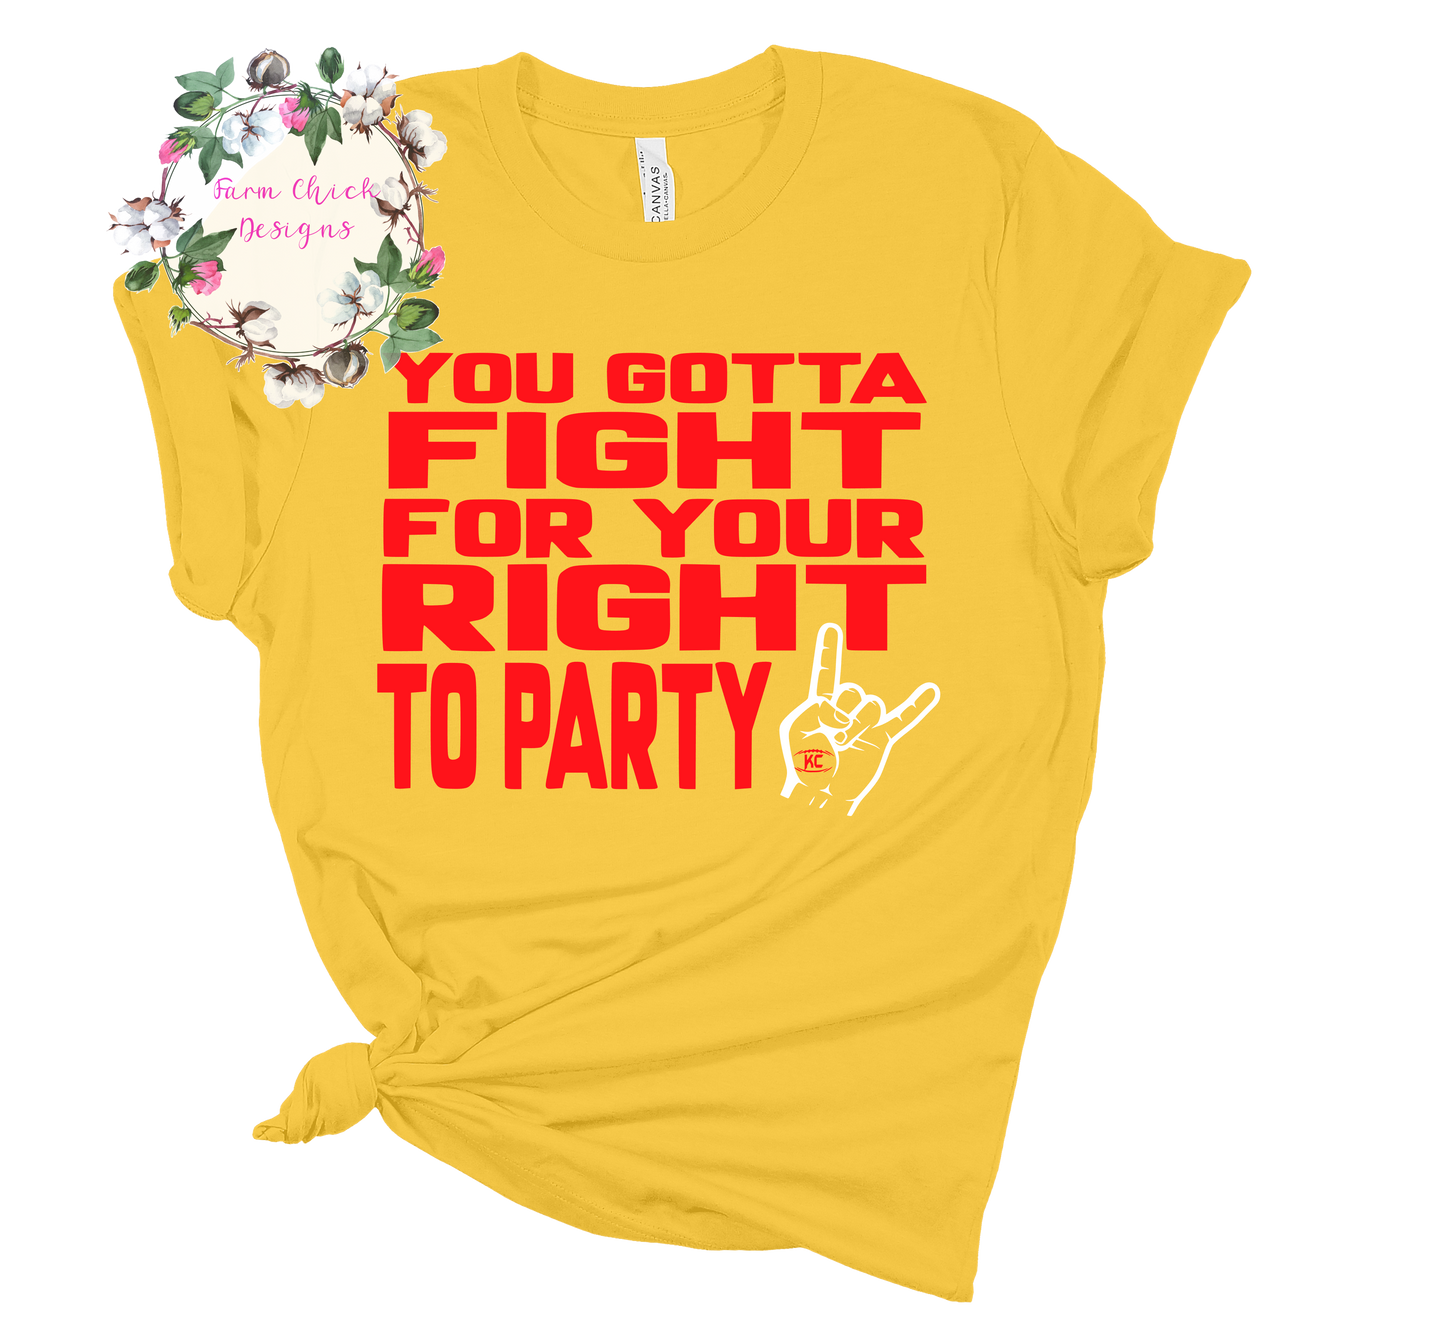 YOU GOT TO FIGHT FOR YOUR RIGHT TO PARTY